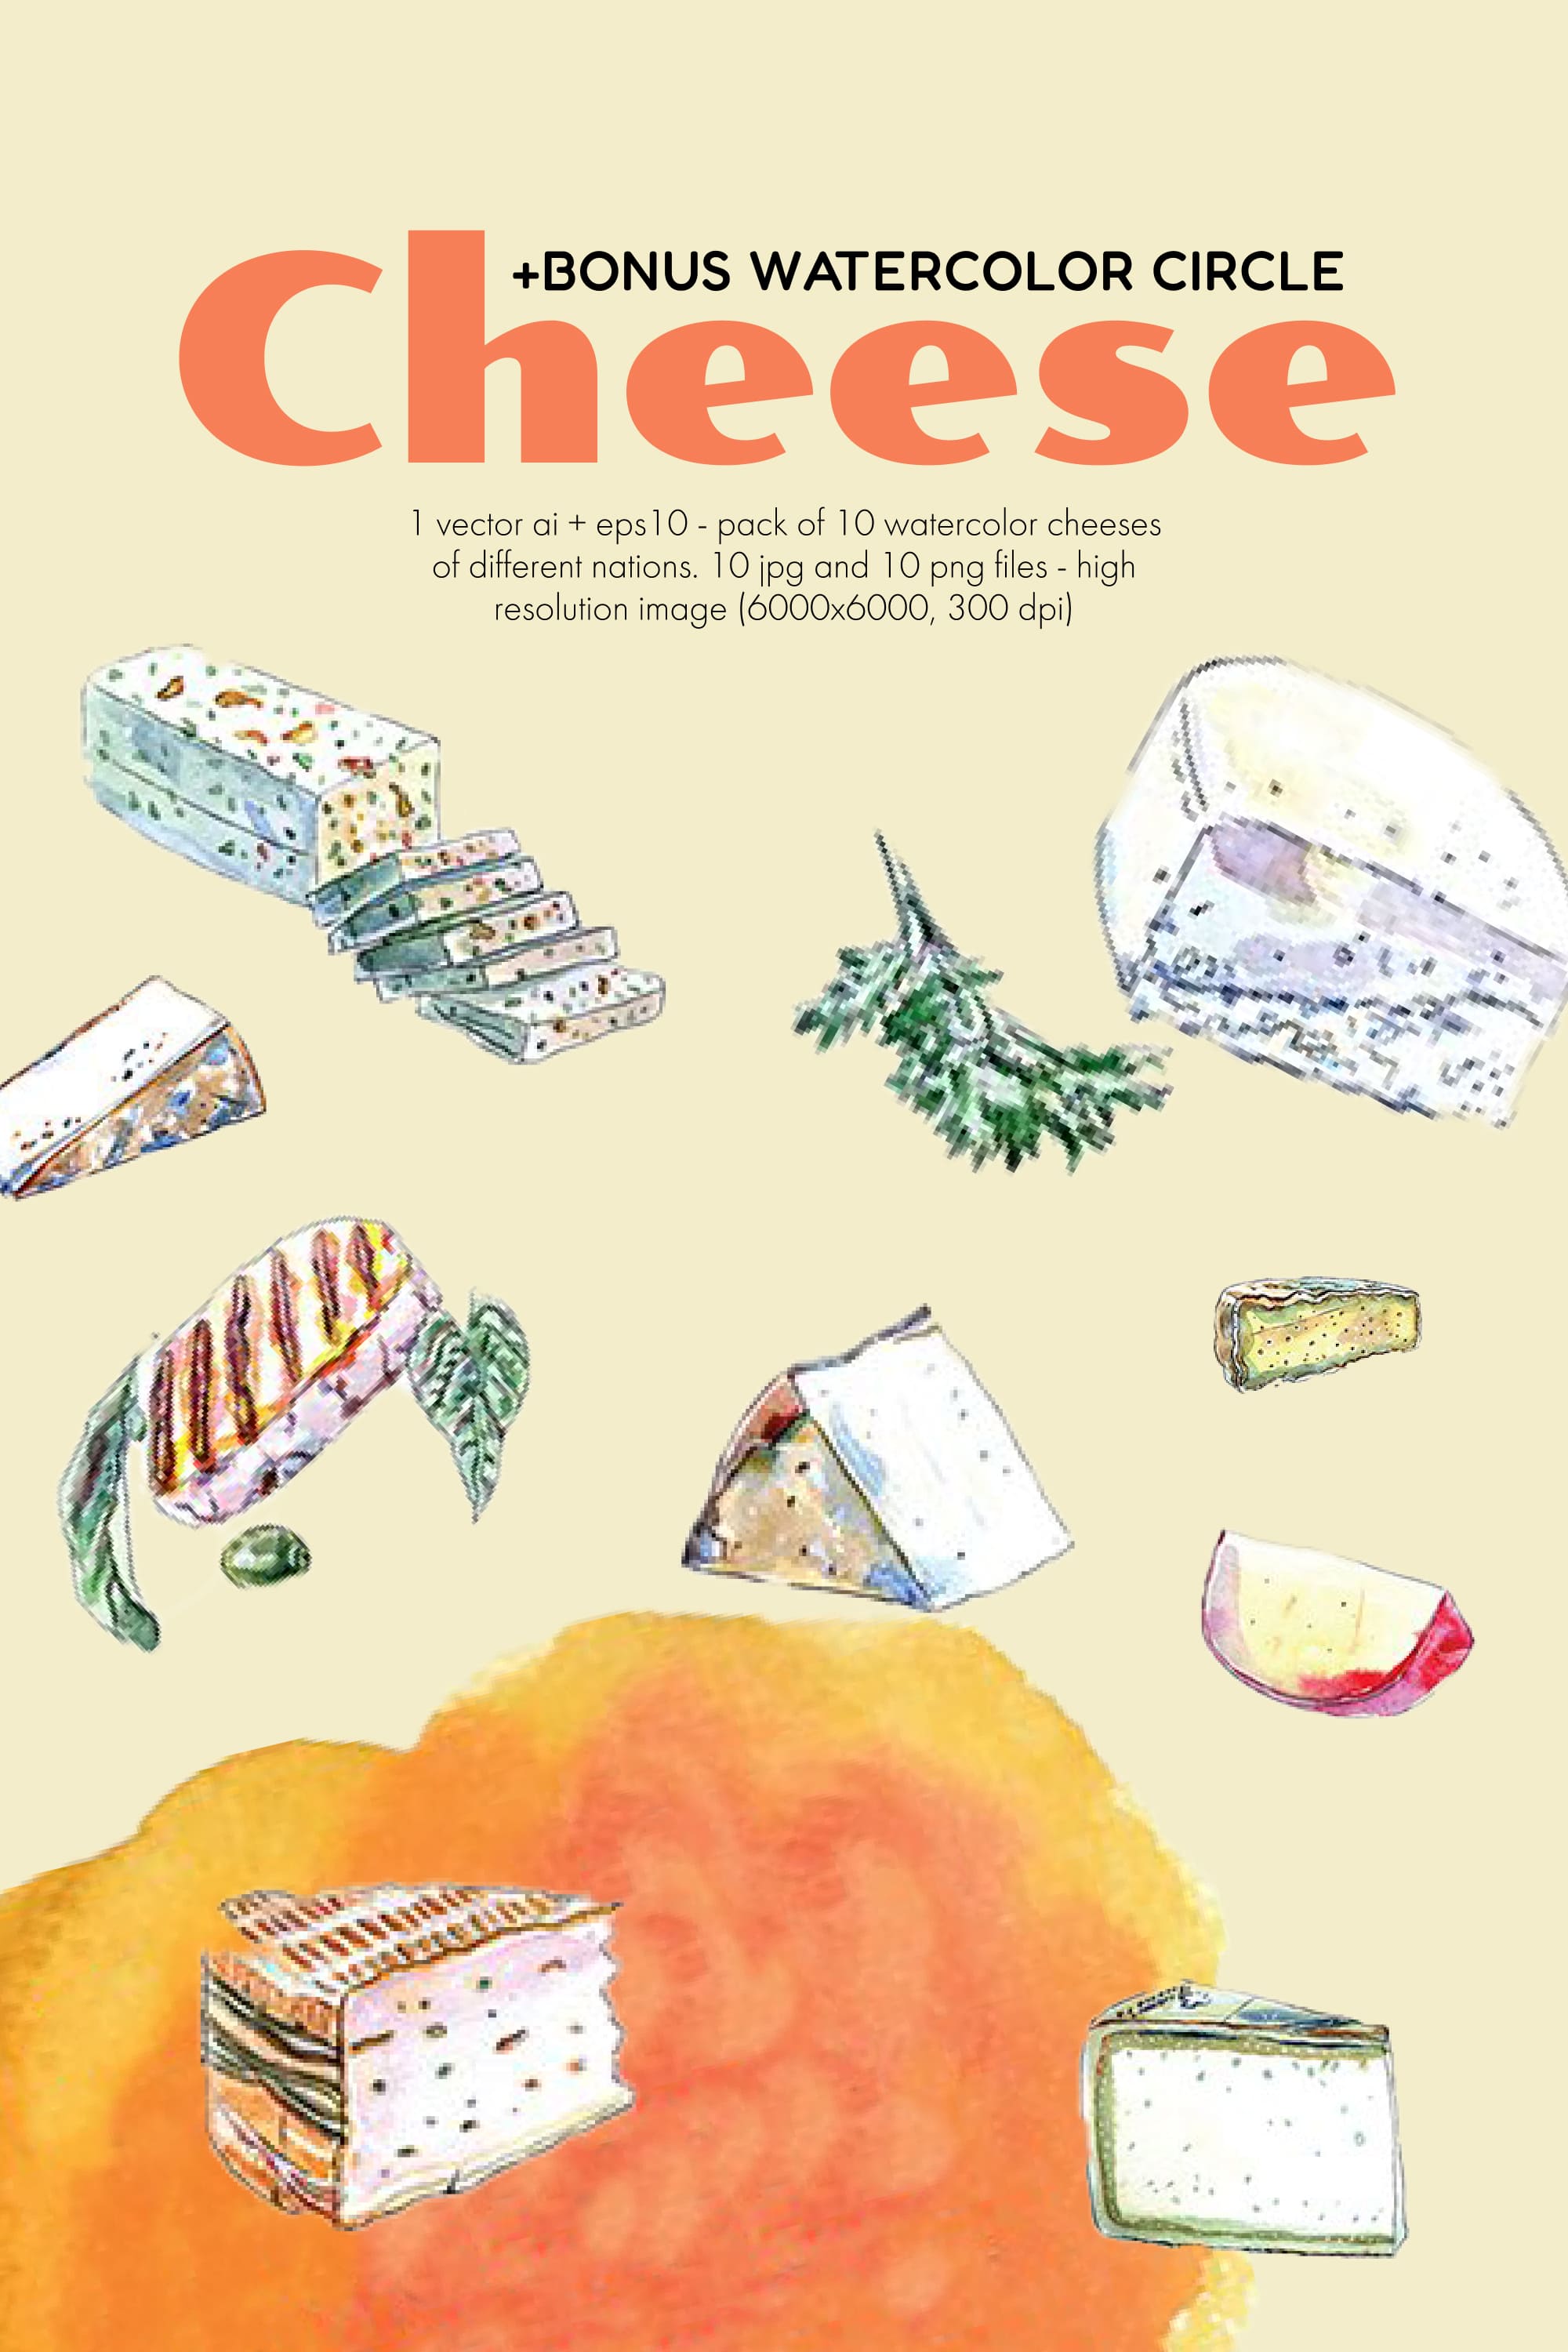 Collection of beautiful images of gourmet cheeses on a bright background.